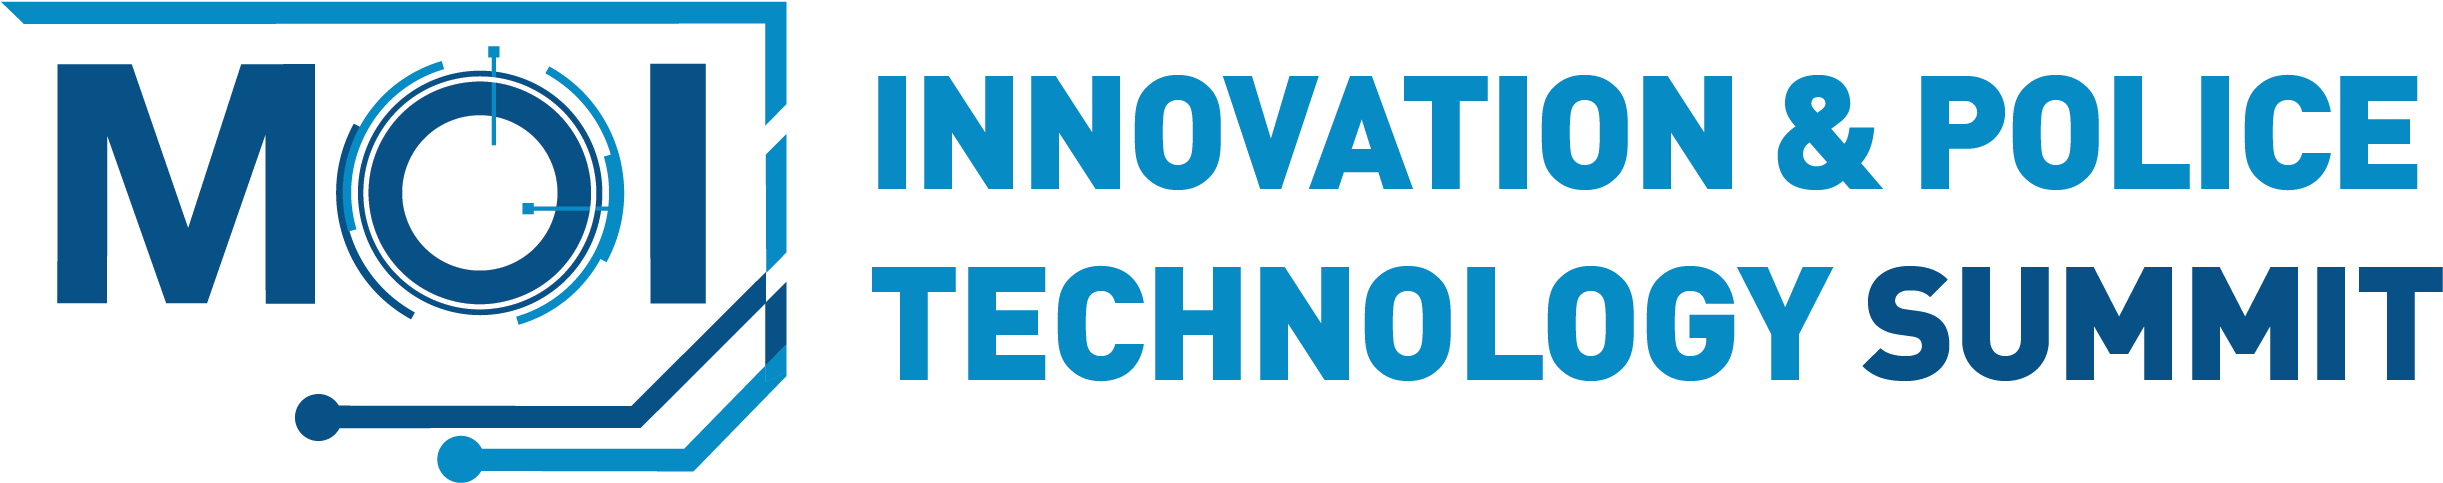 Innovation Police Technology Summit Logo PNG image